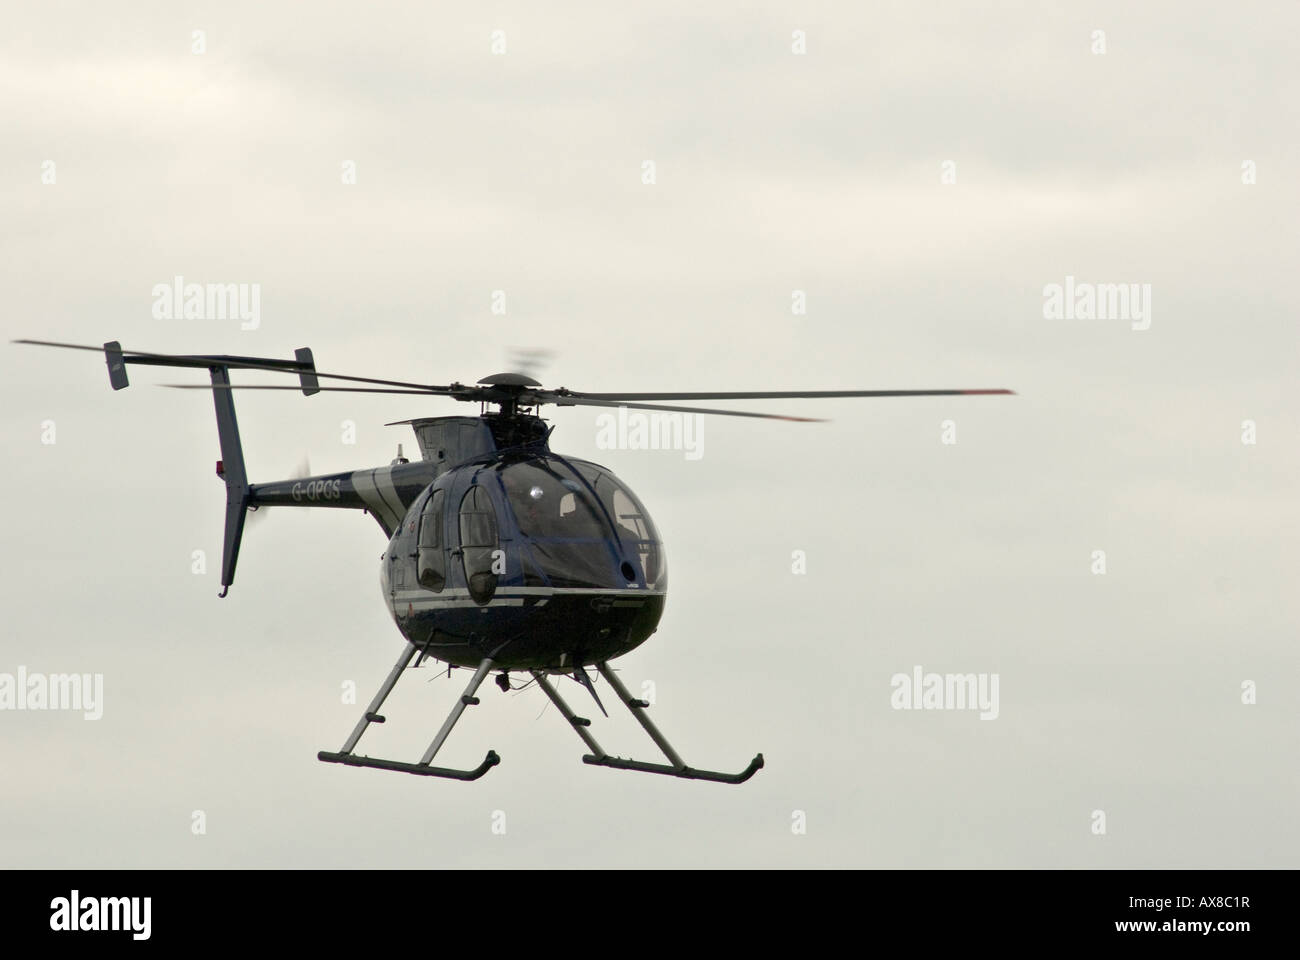 Commercial Helicopter Pilot Training Stock Photo